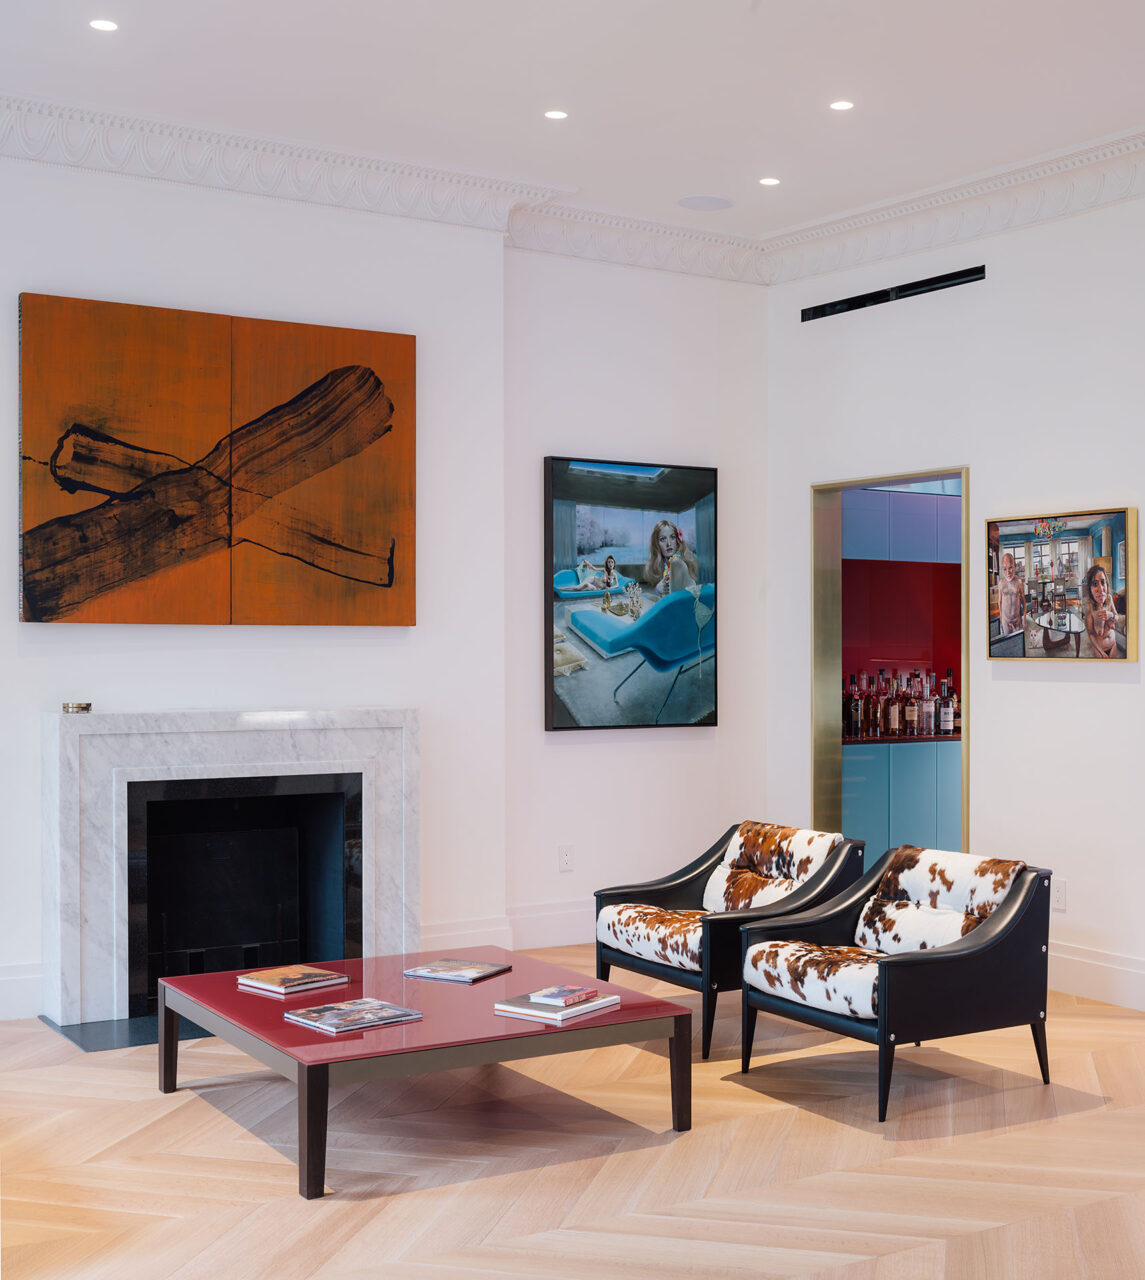 Bold artworks make up this living room that doubles as a gallery